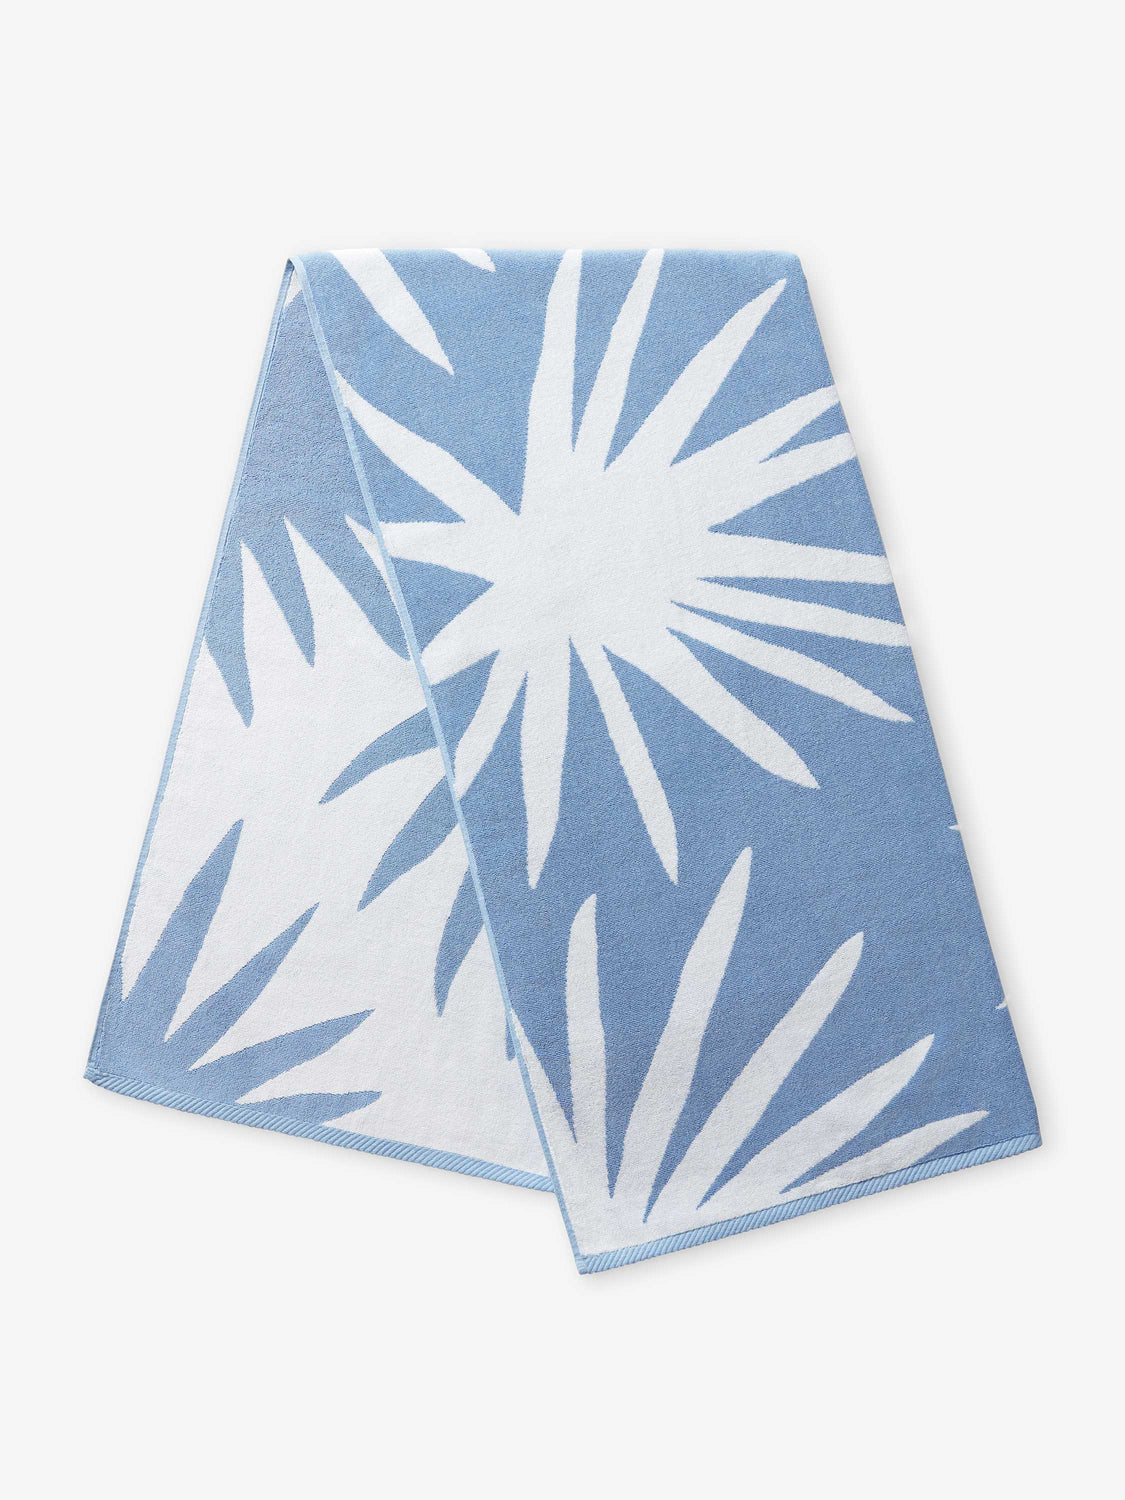 A folded blue and white tropical patterned cabana beach towel.